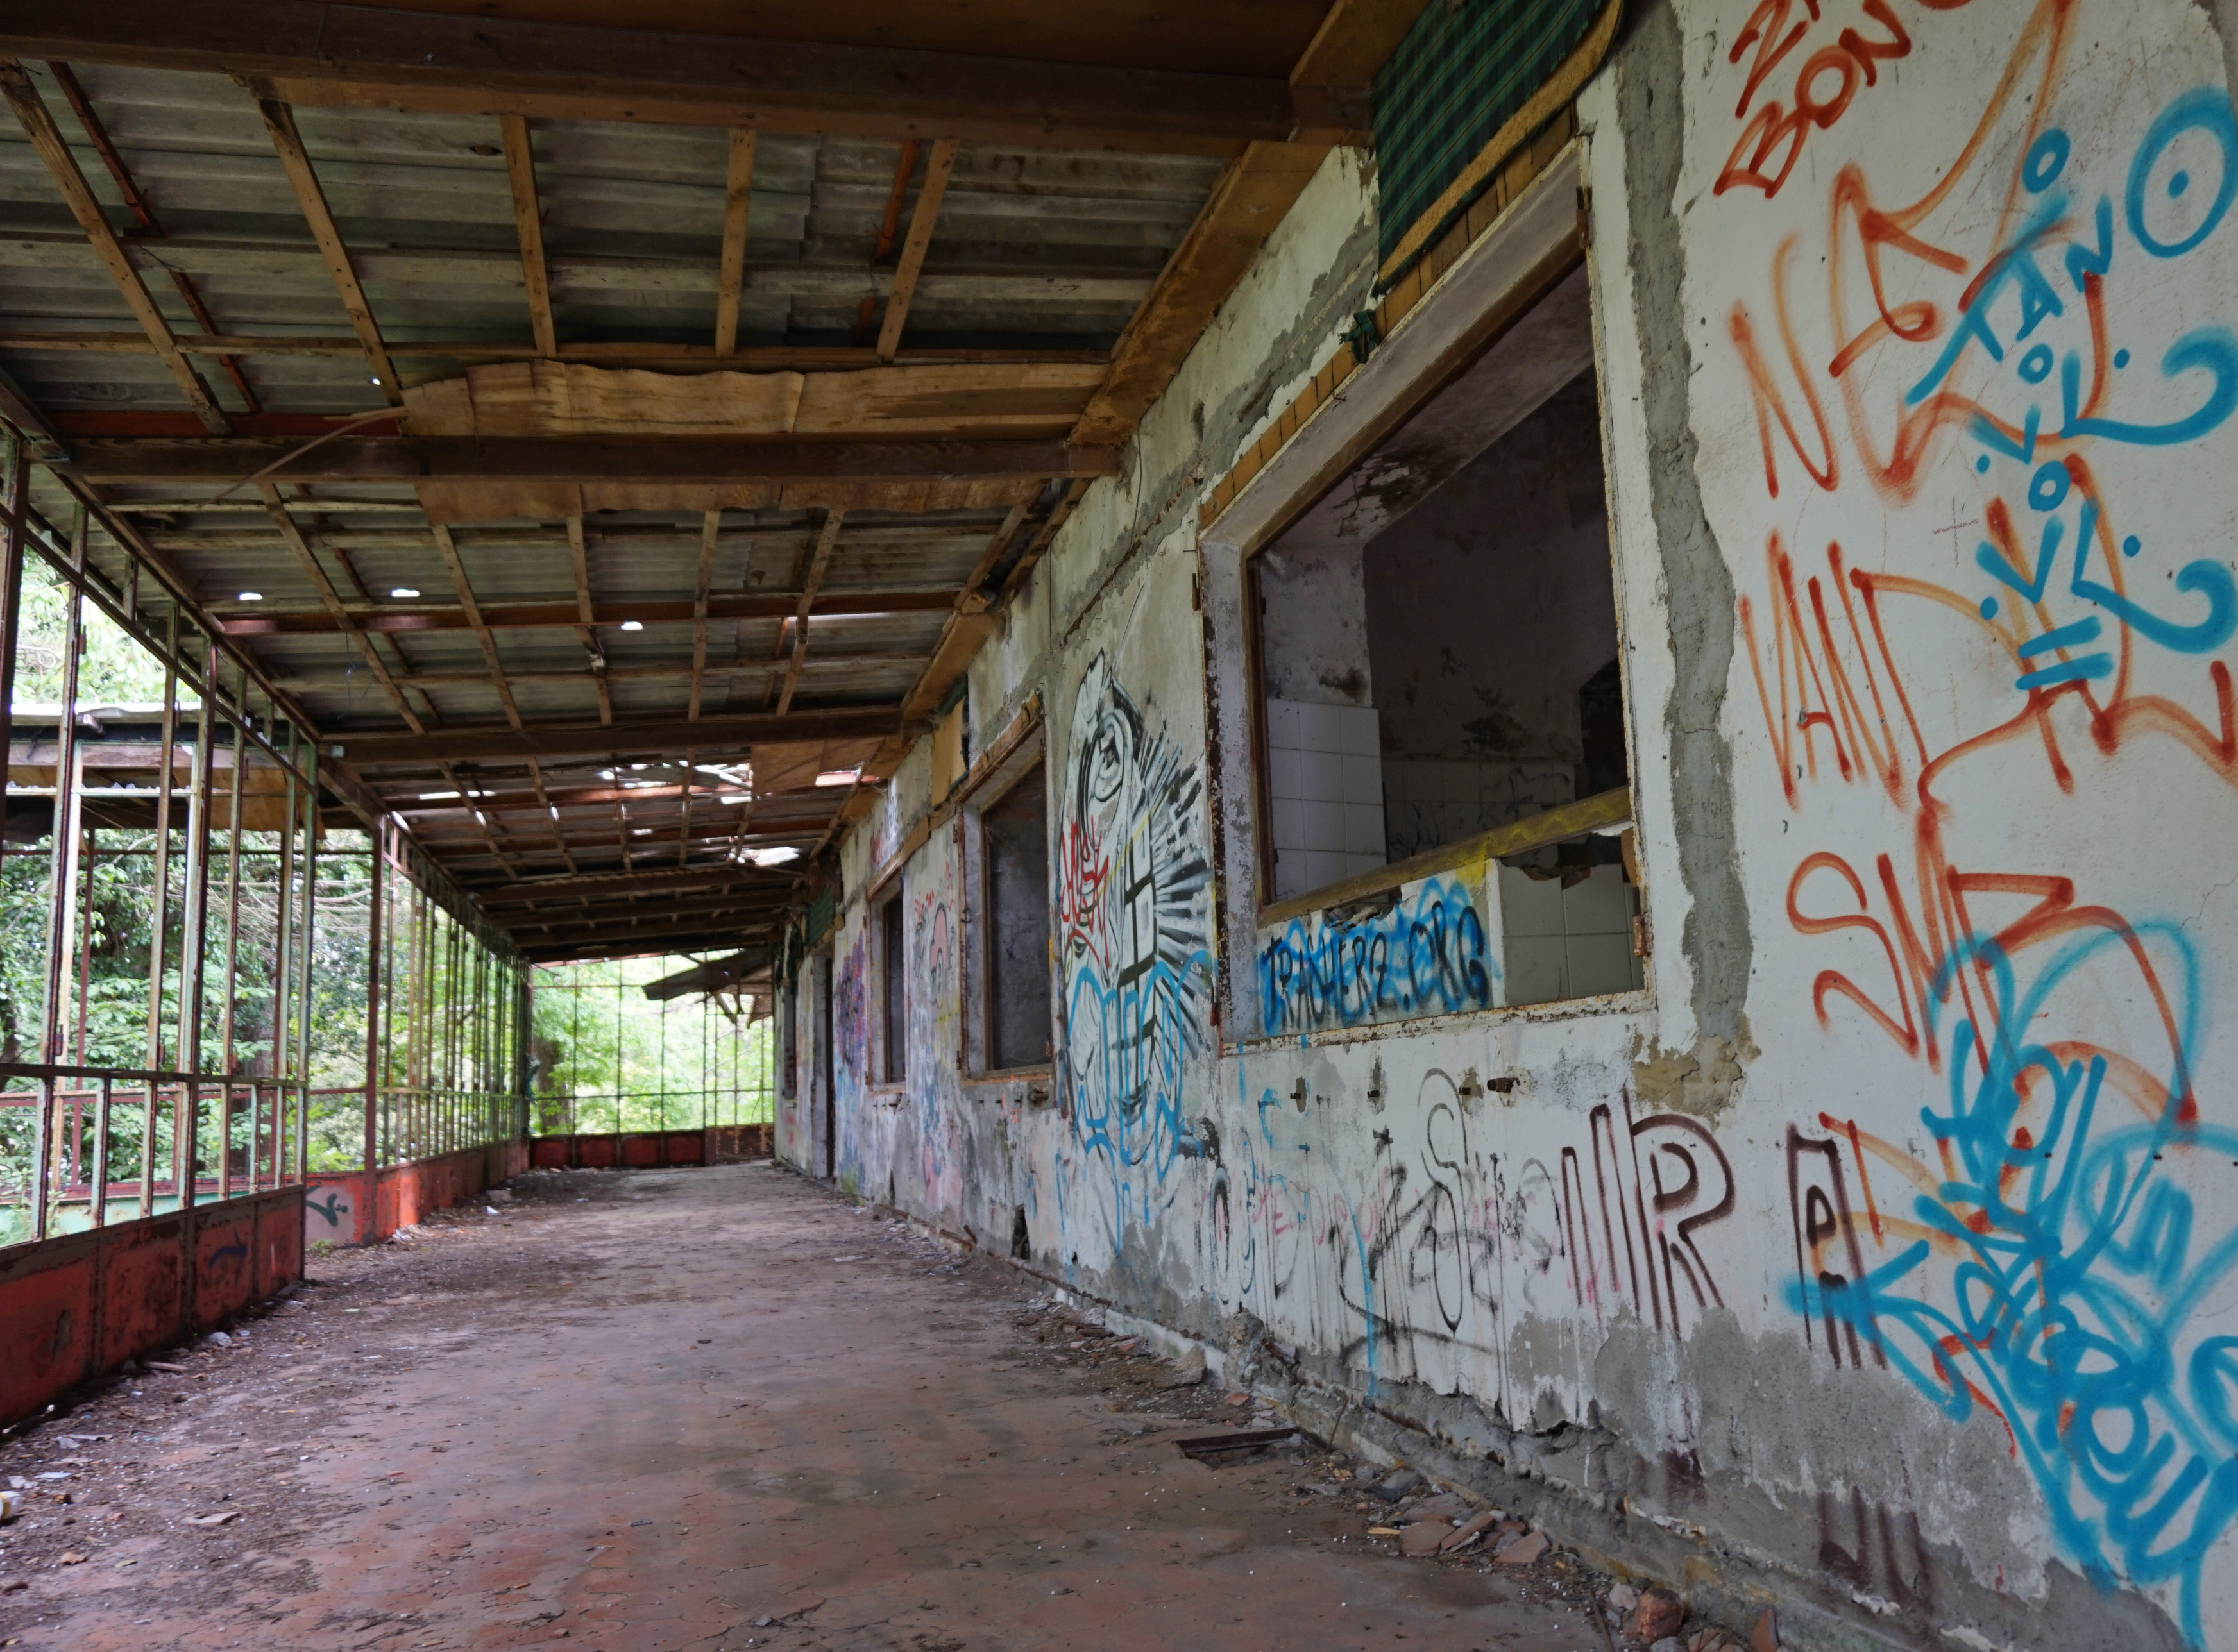 File:Abandoned building interior in Italy.jpg - Wikimedia Commons